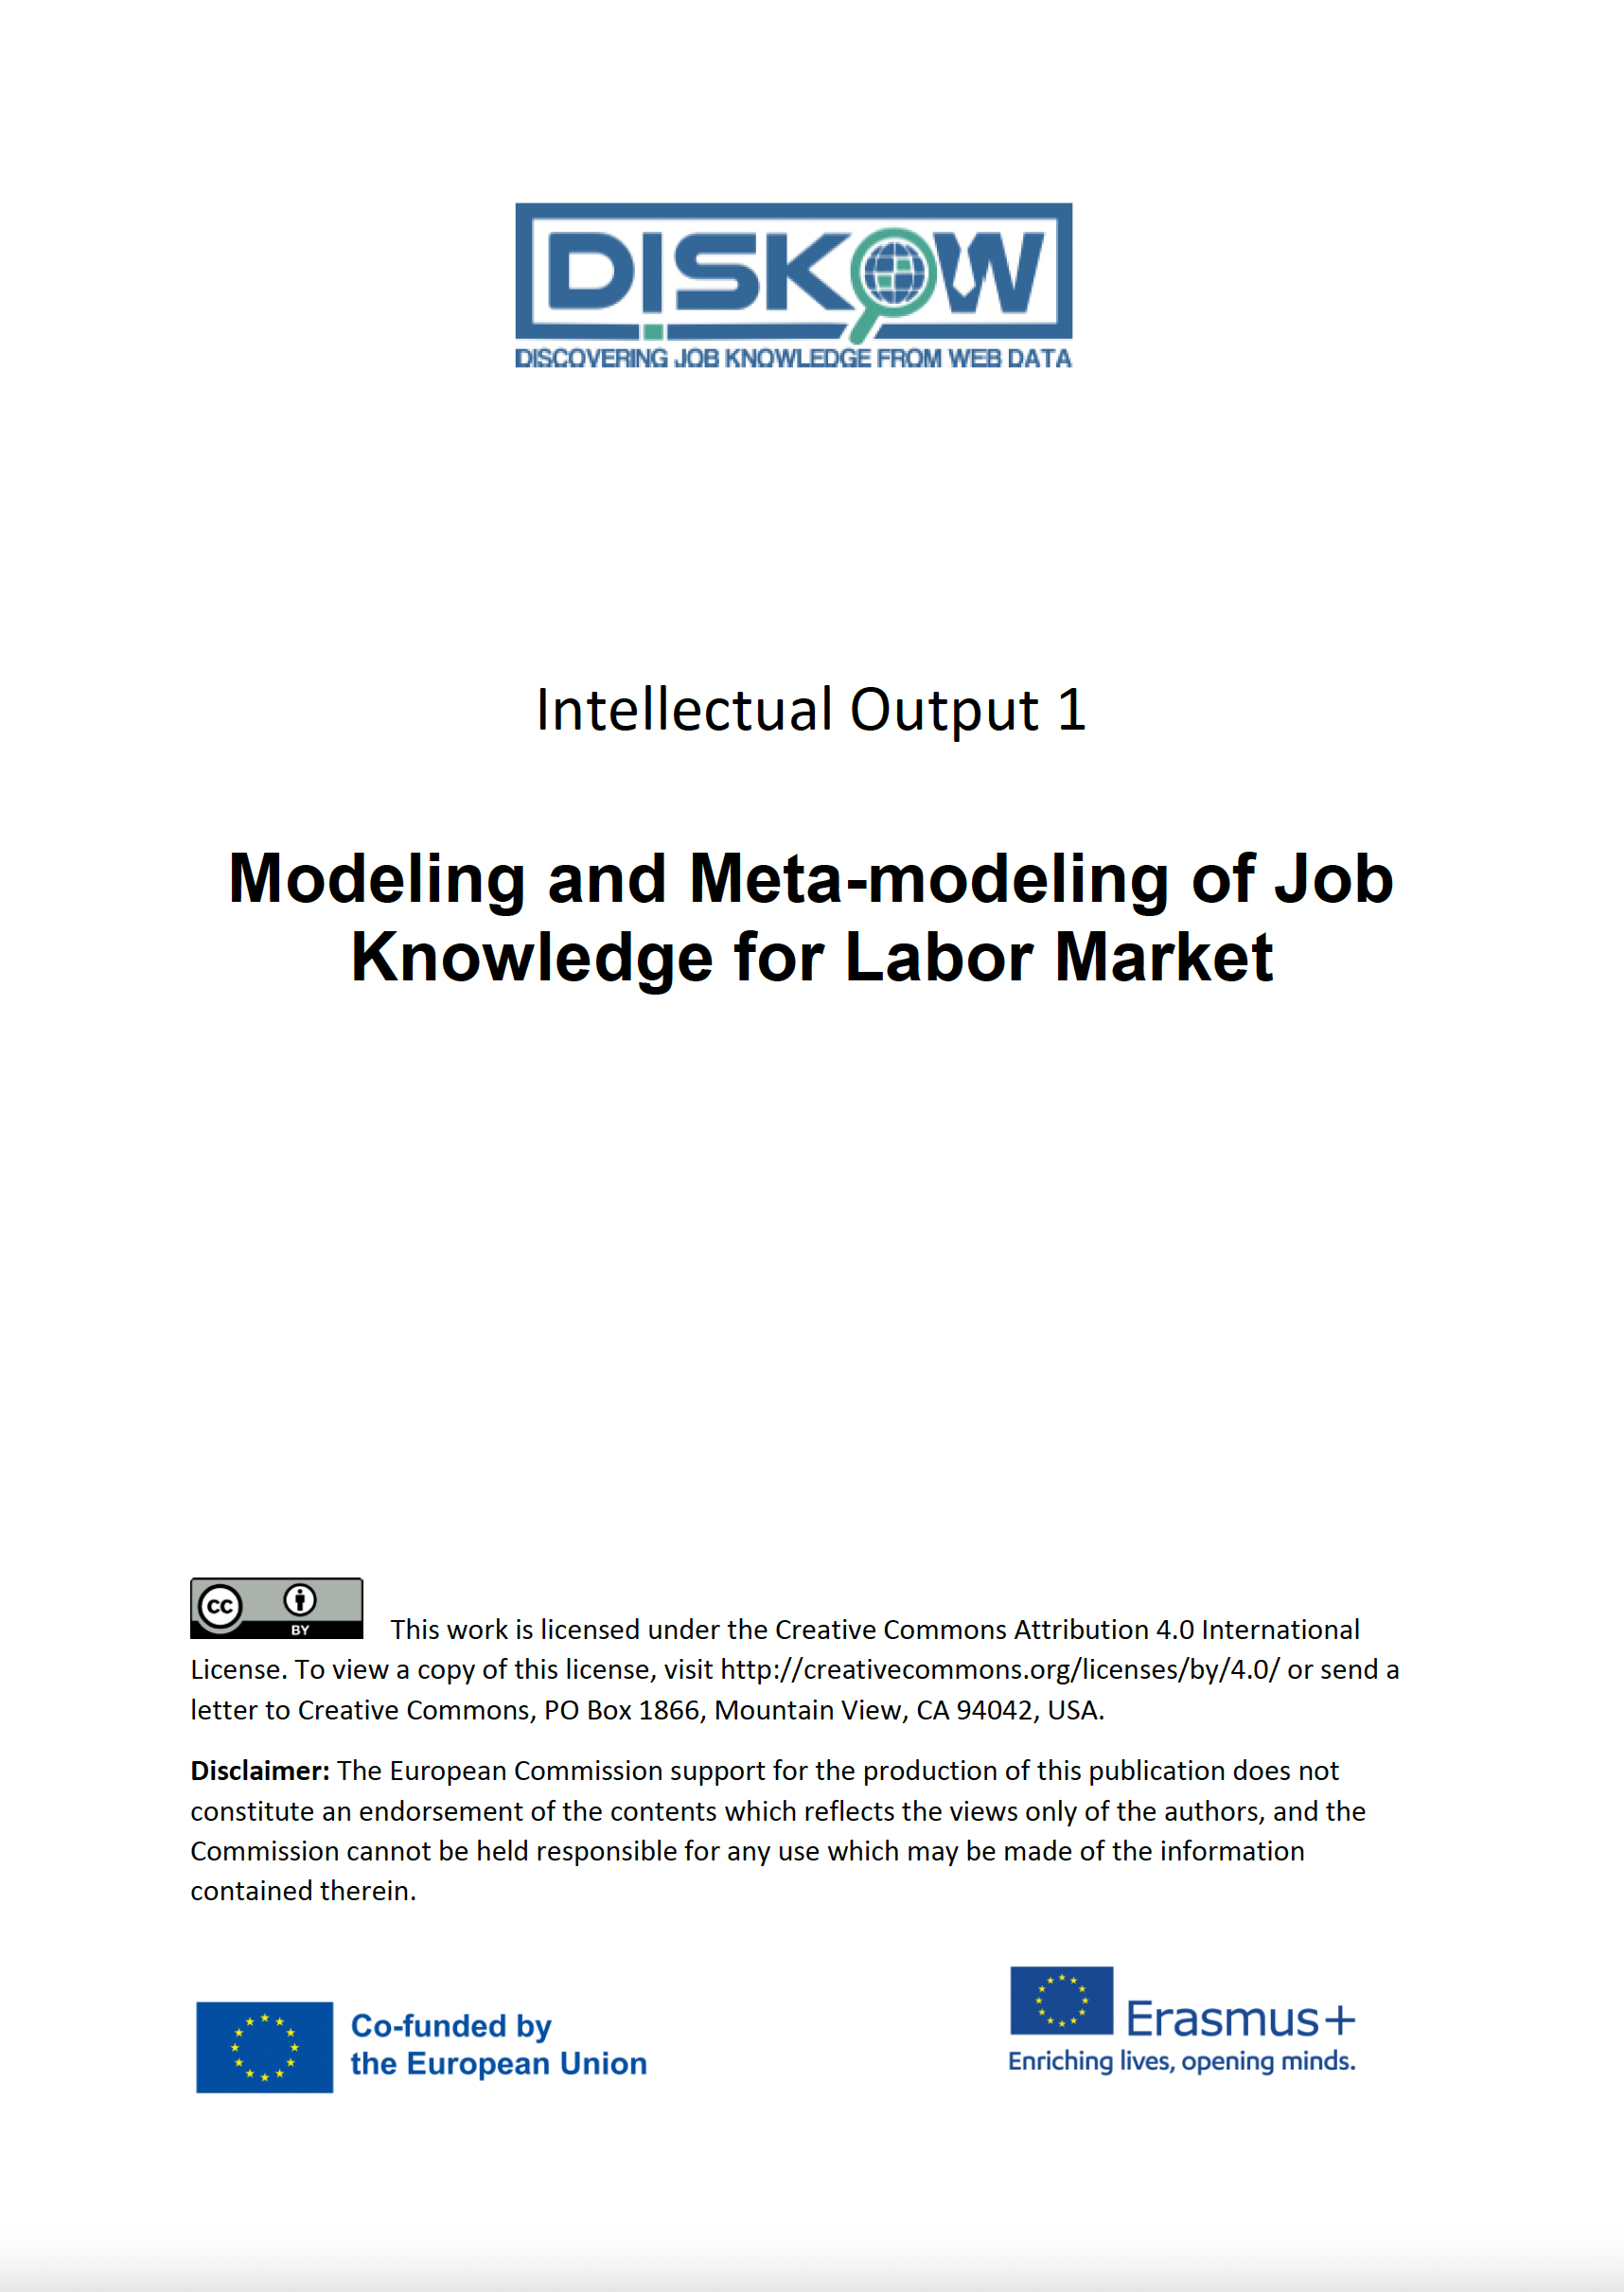 IO1: Modeling and Meta-modeling of Job Knowledge for Labor Market